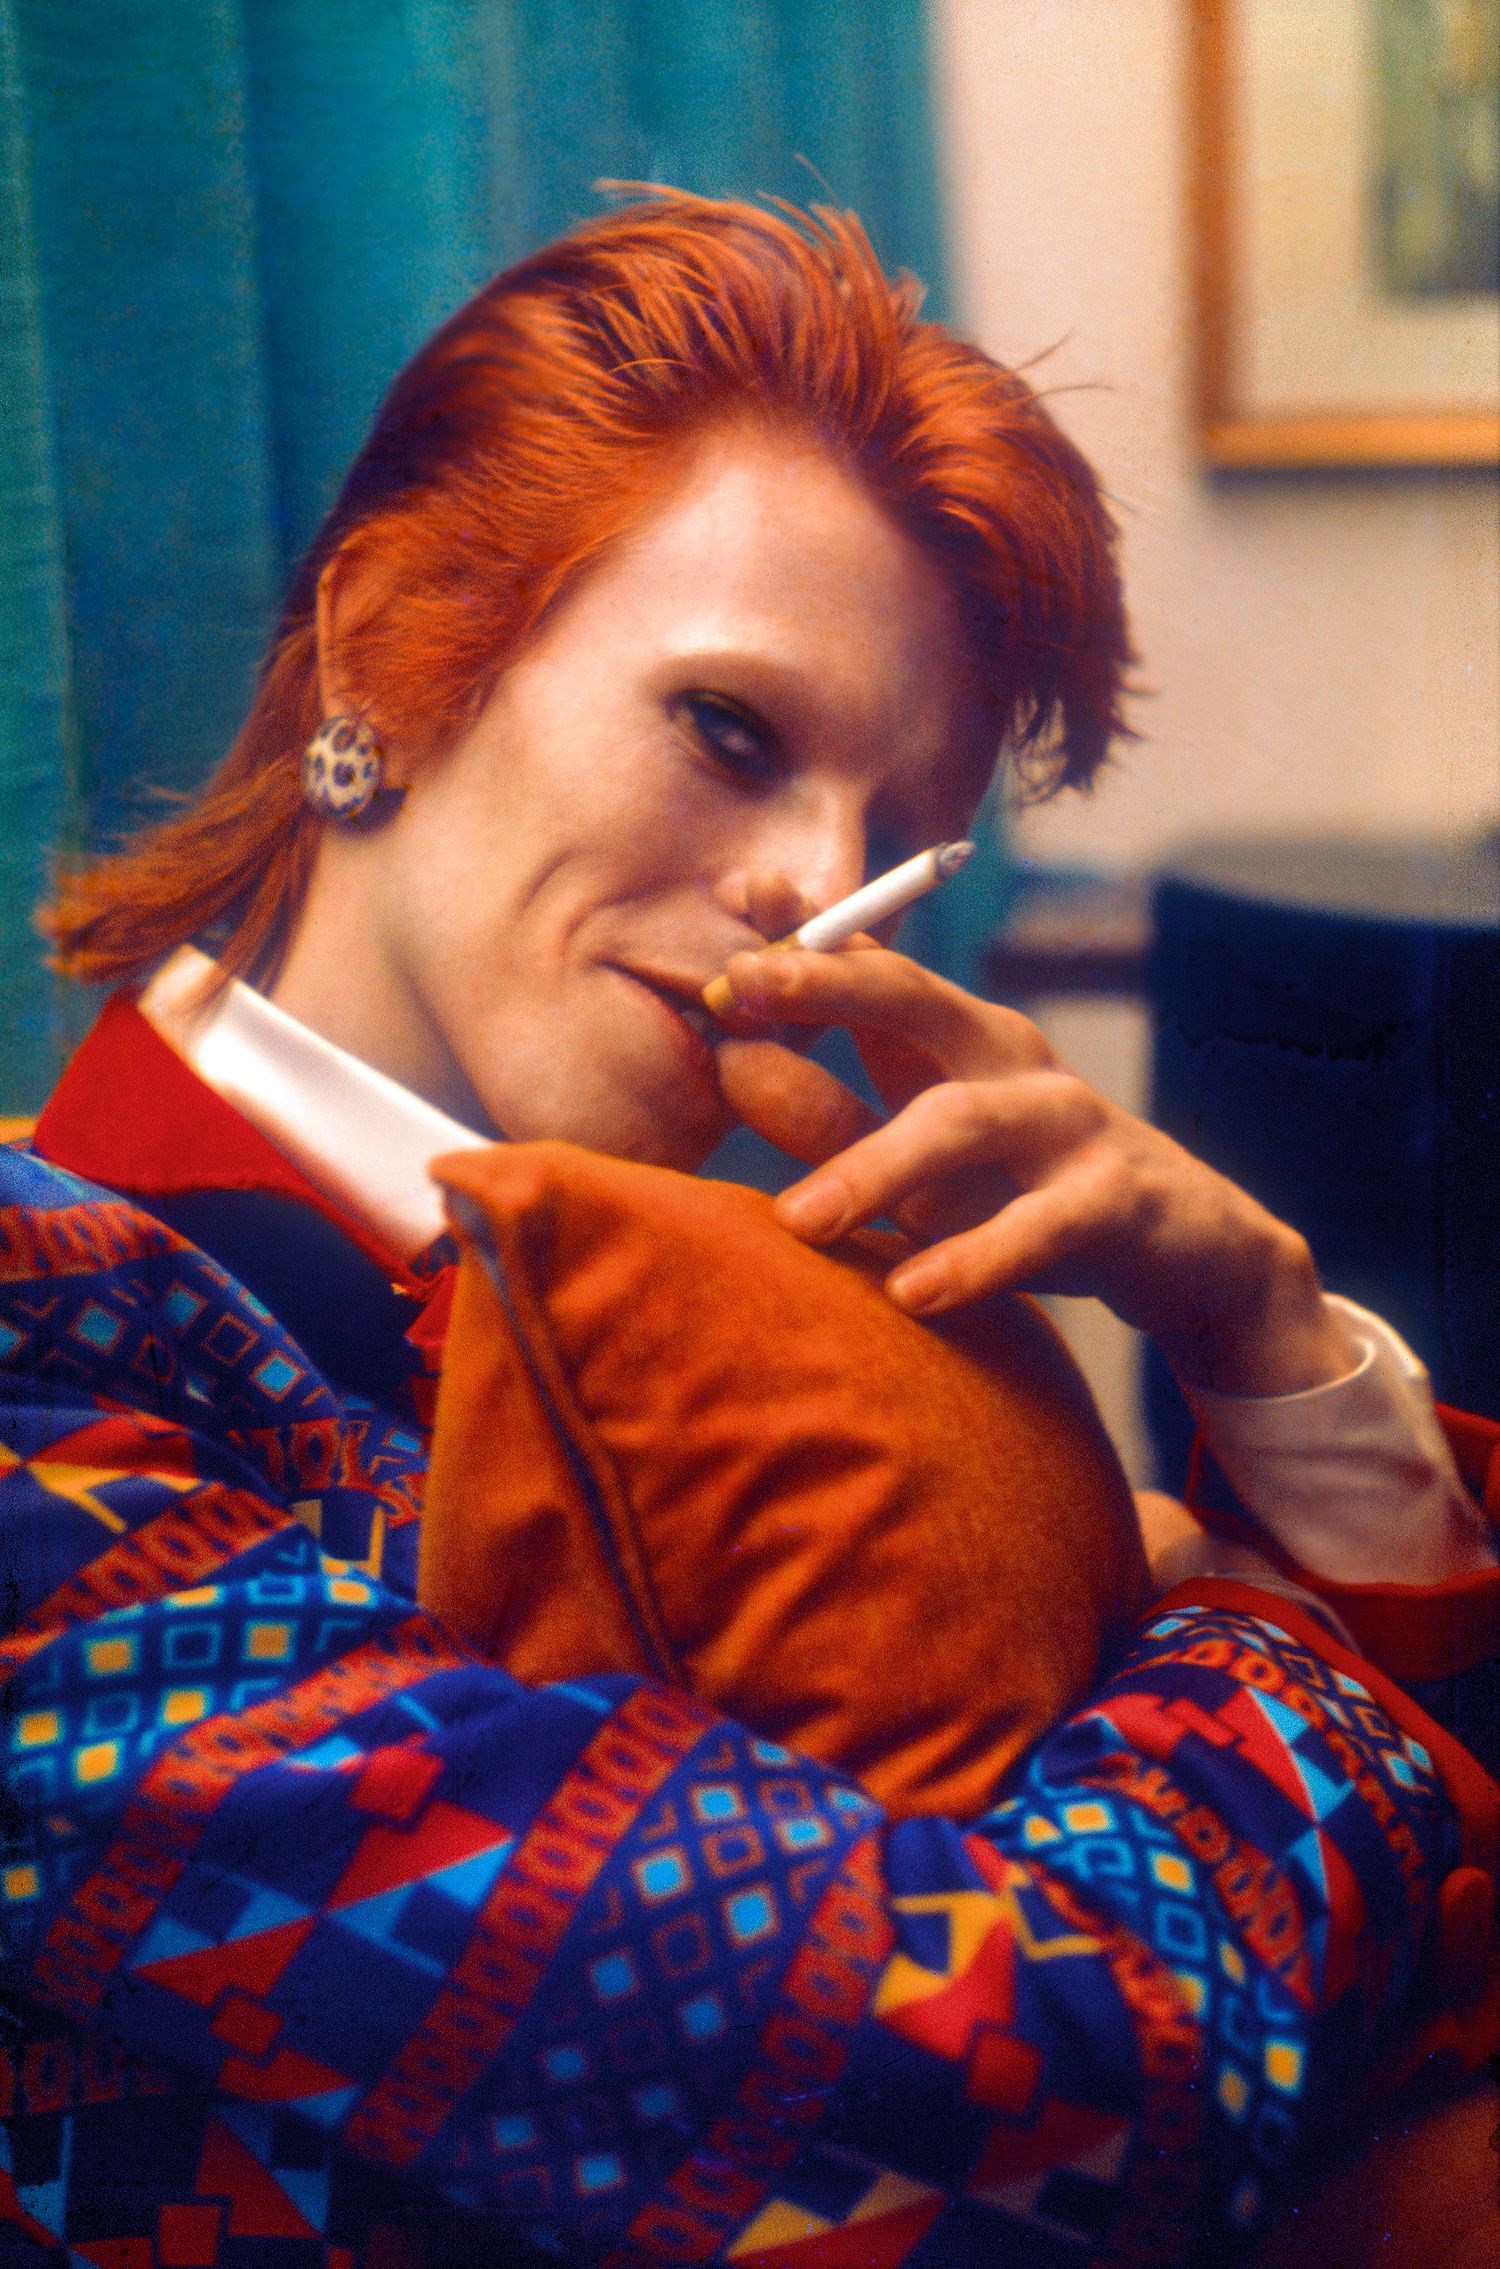 David Bowie's Most Memorable Fashion Moments - David Bowie Looks